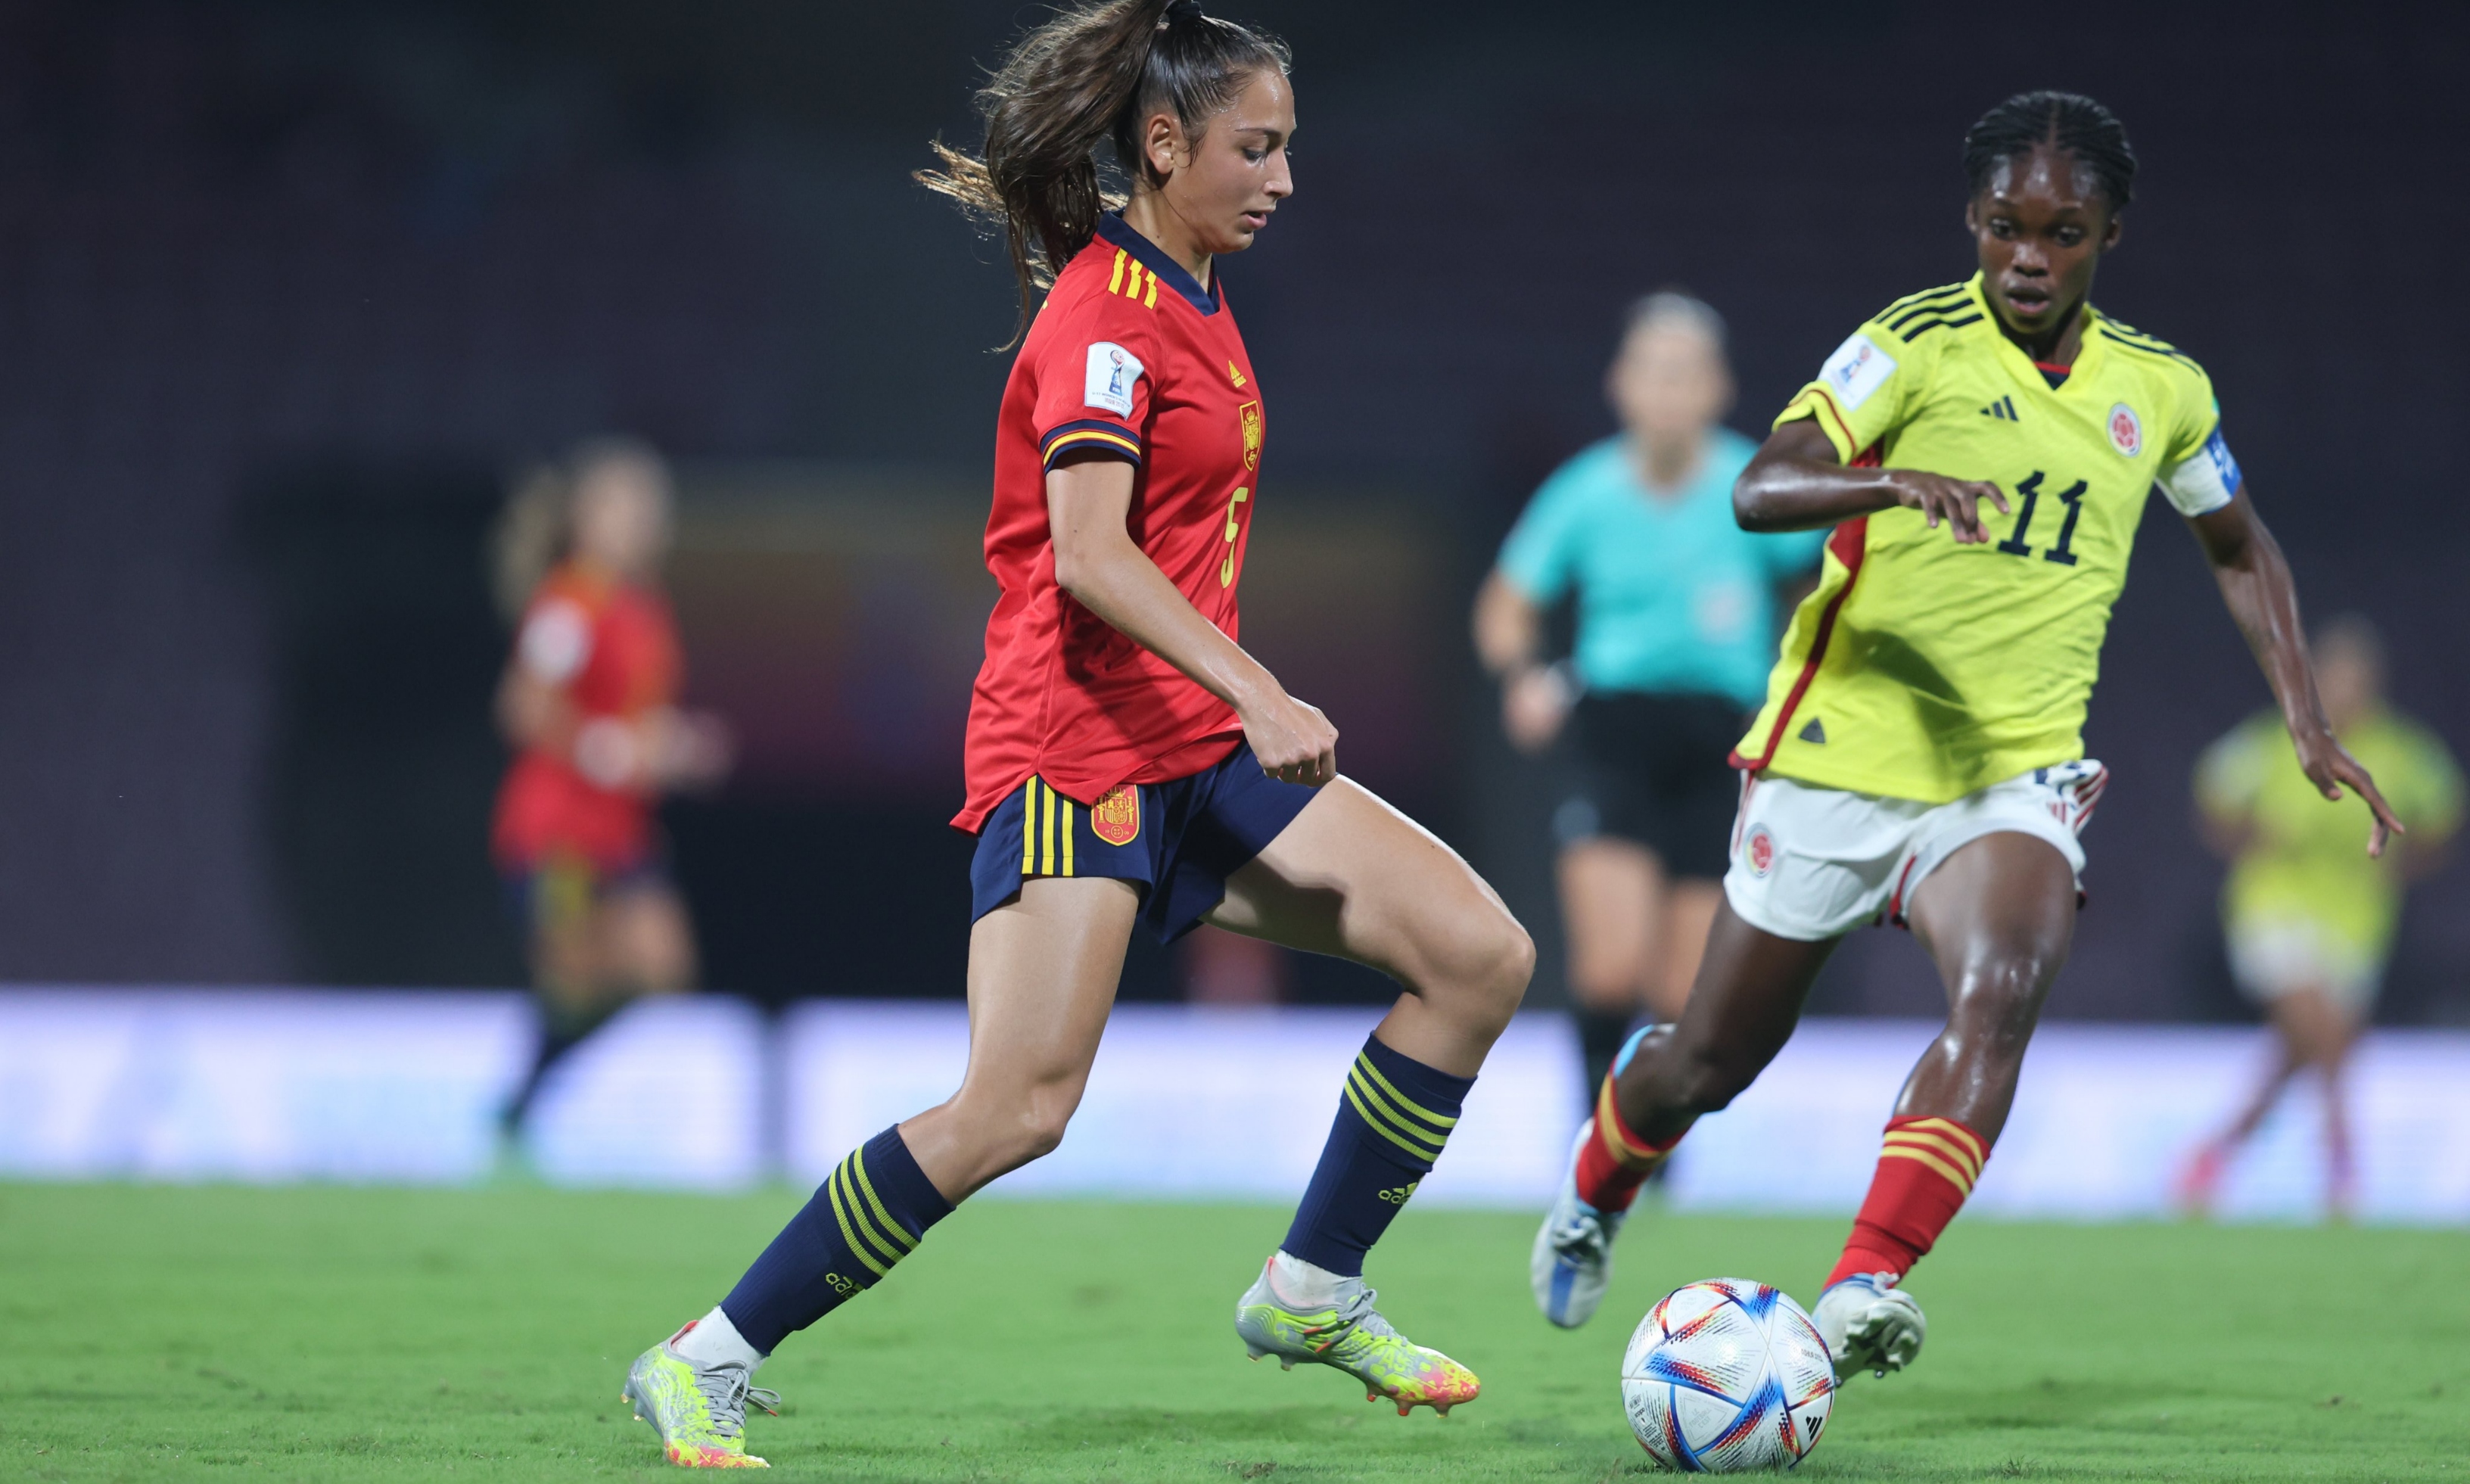 Colombia National Team vs Spain National Team in the FIFA U-17 Women's World Cup